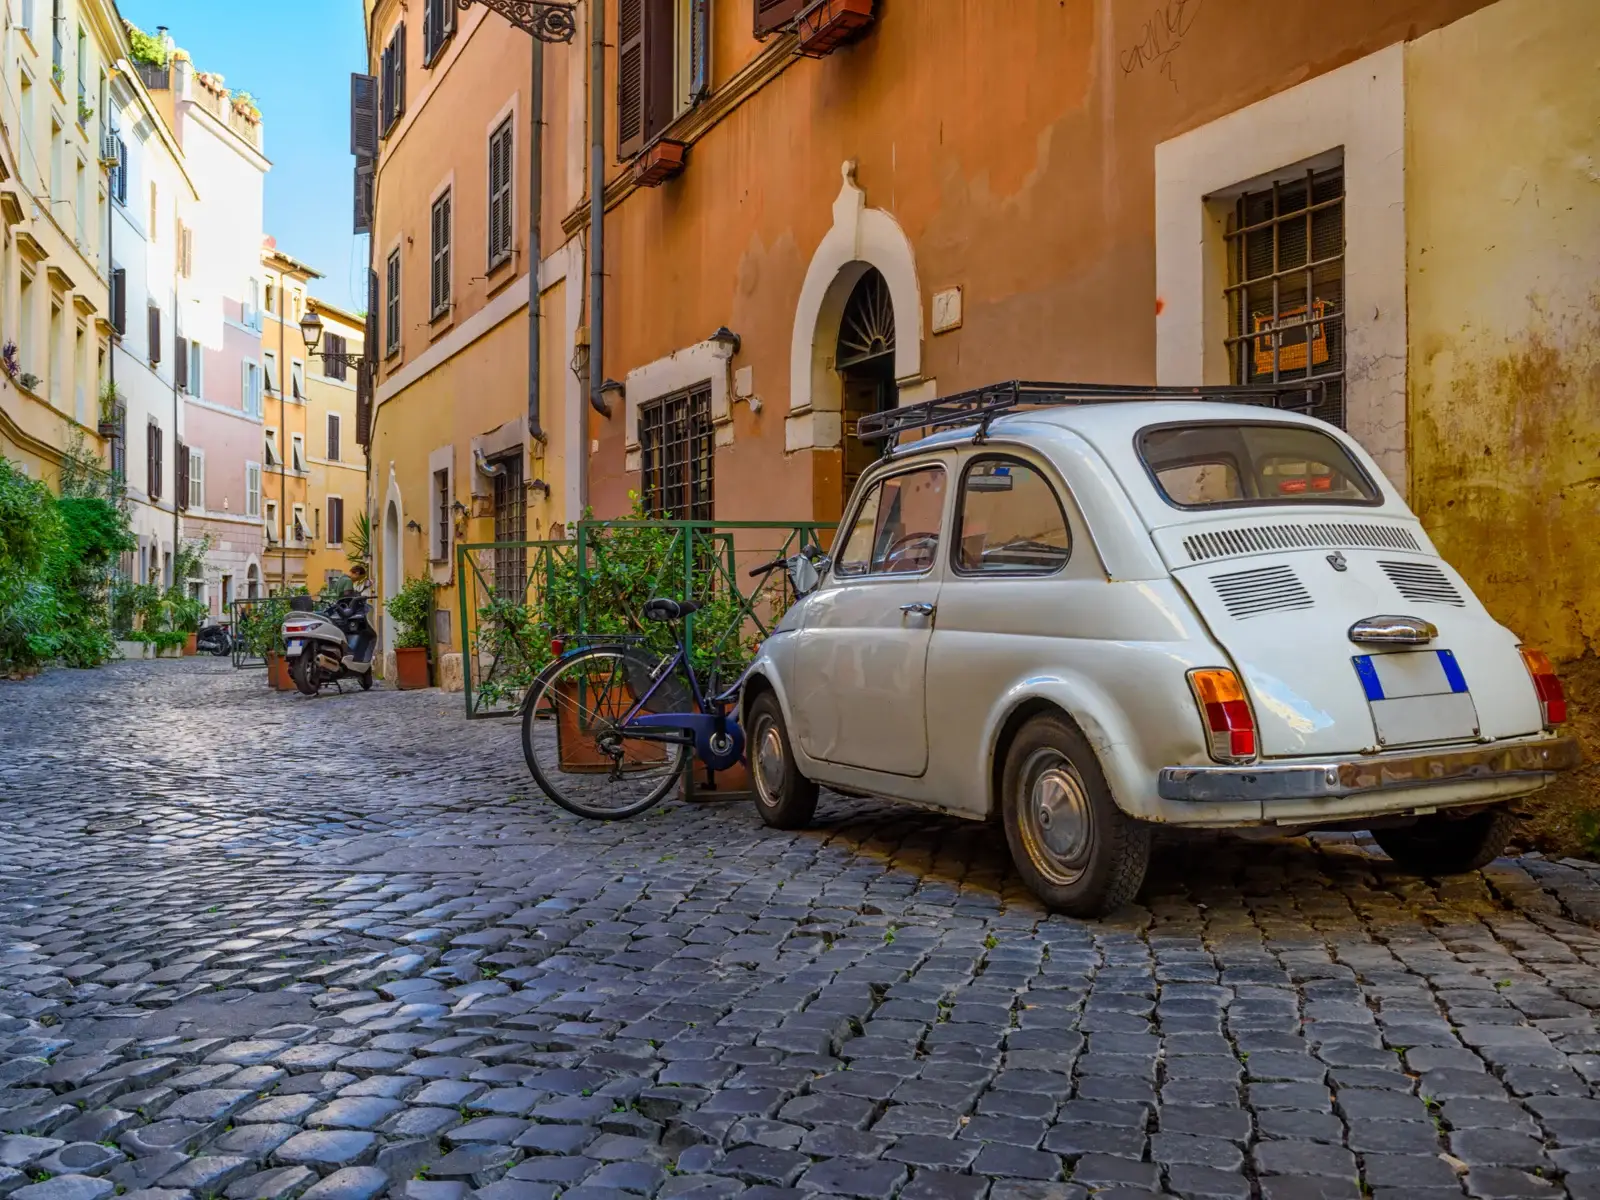 Cozy old street with a Fiat vehicle next to bikes during the least busy time to visit Rome